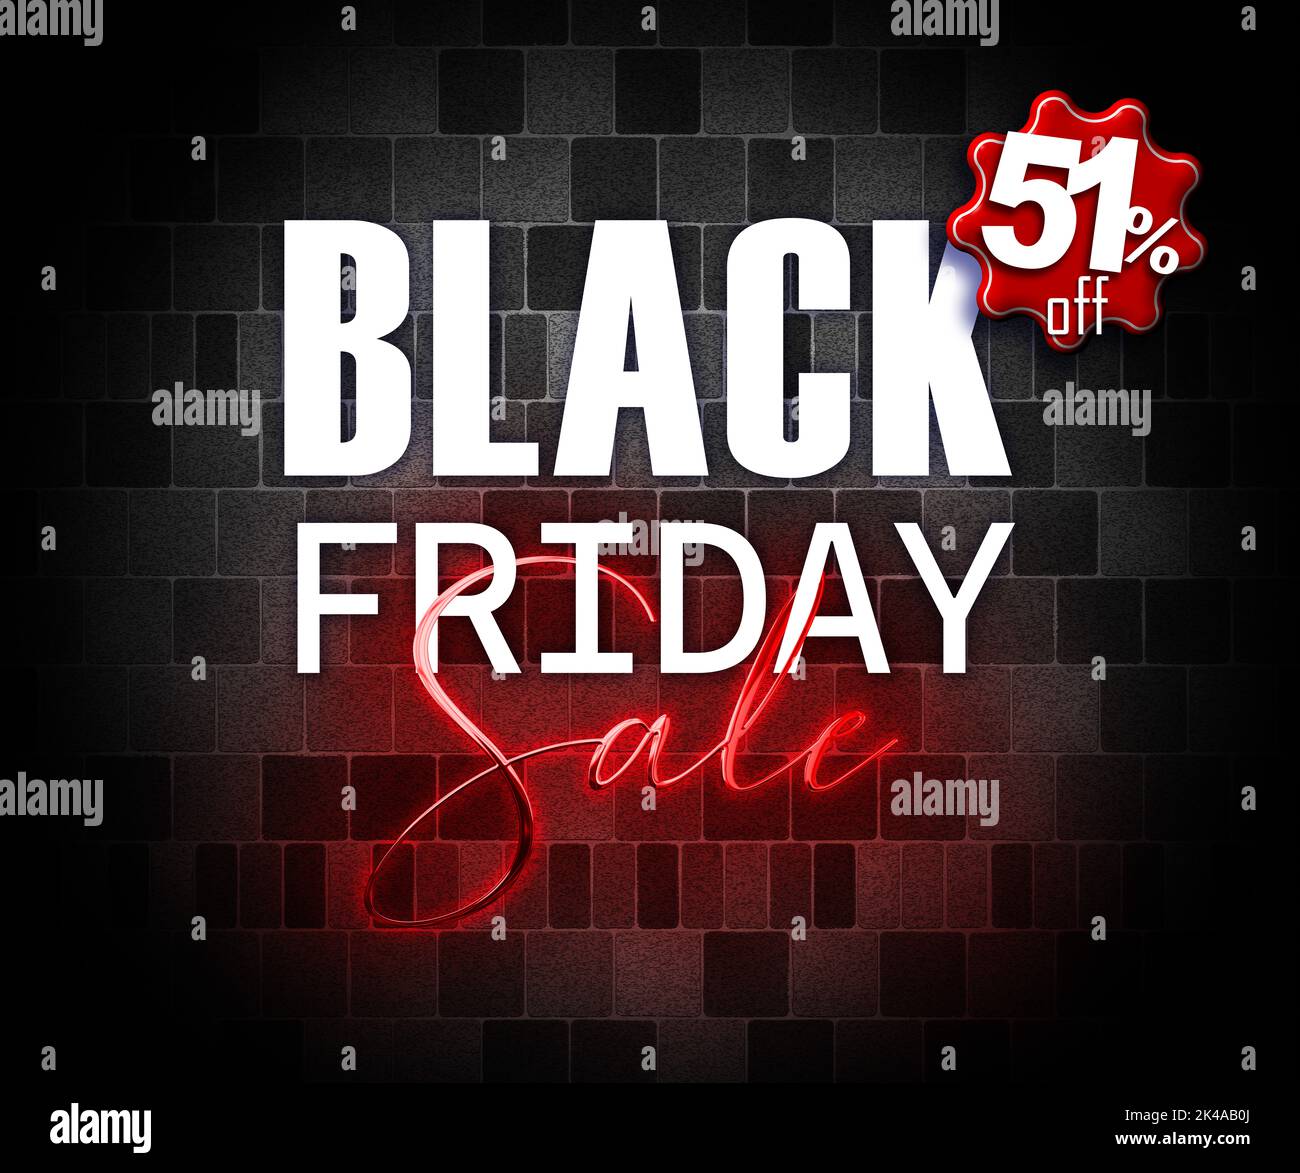 illustration with 3d elements black friday promotion banner 51 percent off sales increase Stock Photo